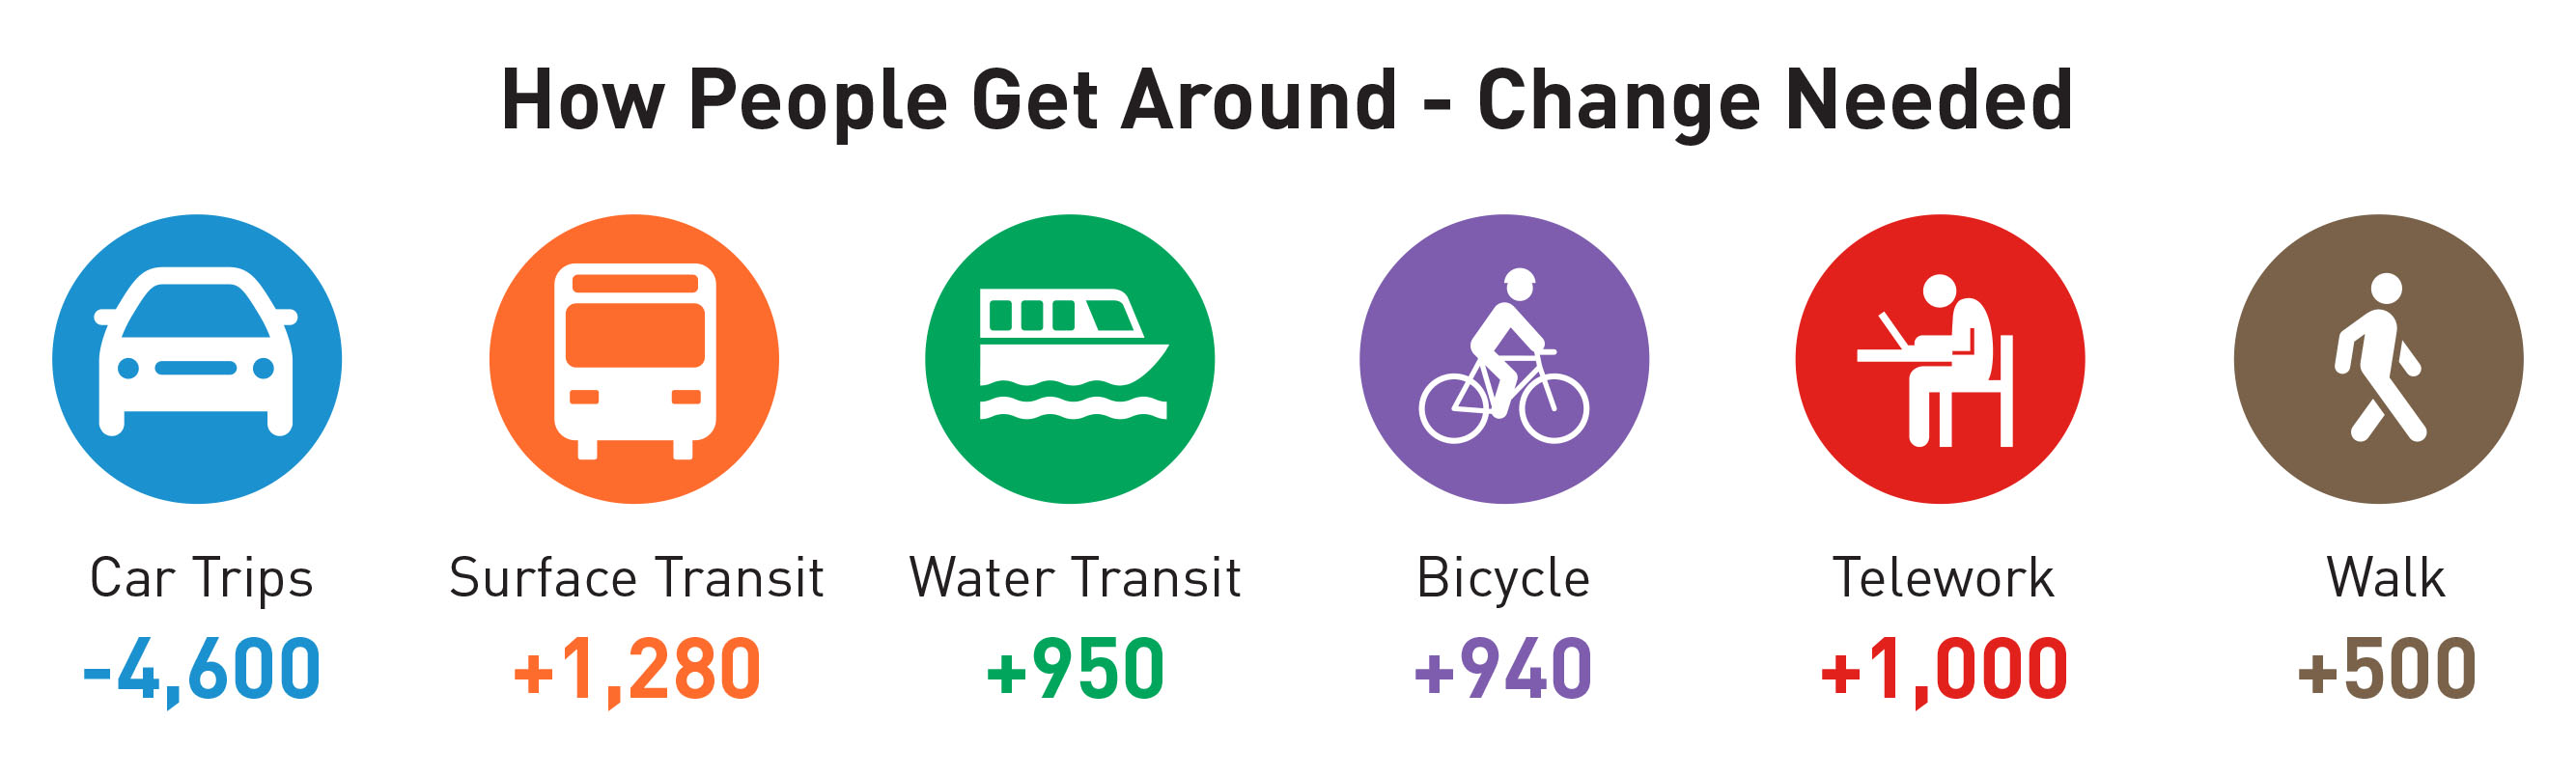 The change needed per hour for hour people get around. 4,600 less people drive. 1,1280 more people take the bus, 950 more people take water taxi, 940 more people ride bike, 1,000 more people telework, 500 more people walk